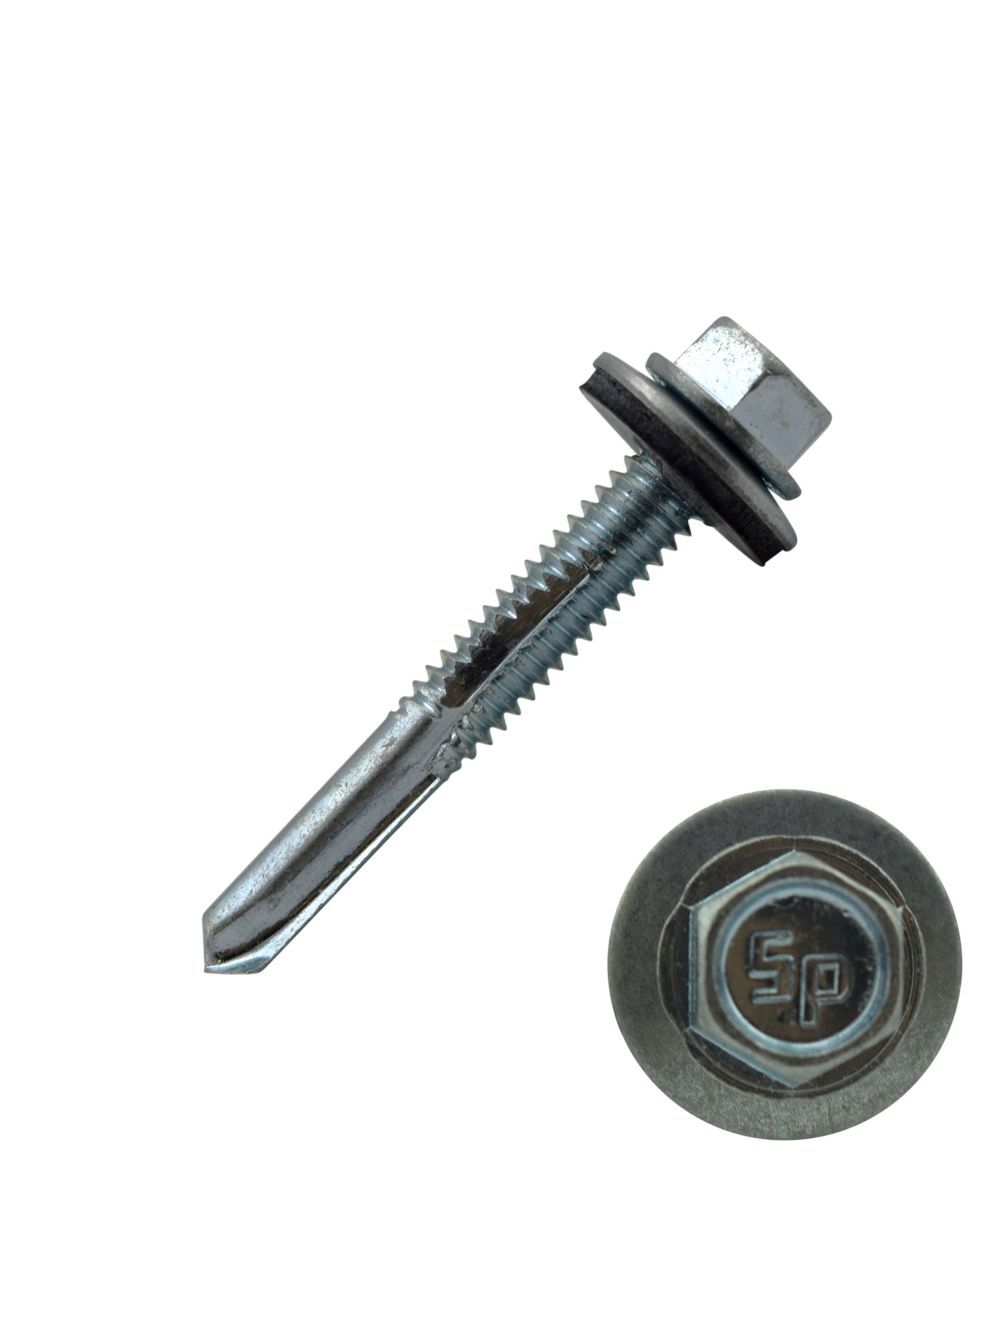 #10 x 1.5in Hex Head Washer Screw - Masonry Tools & Supplies